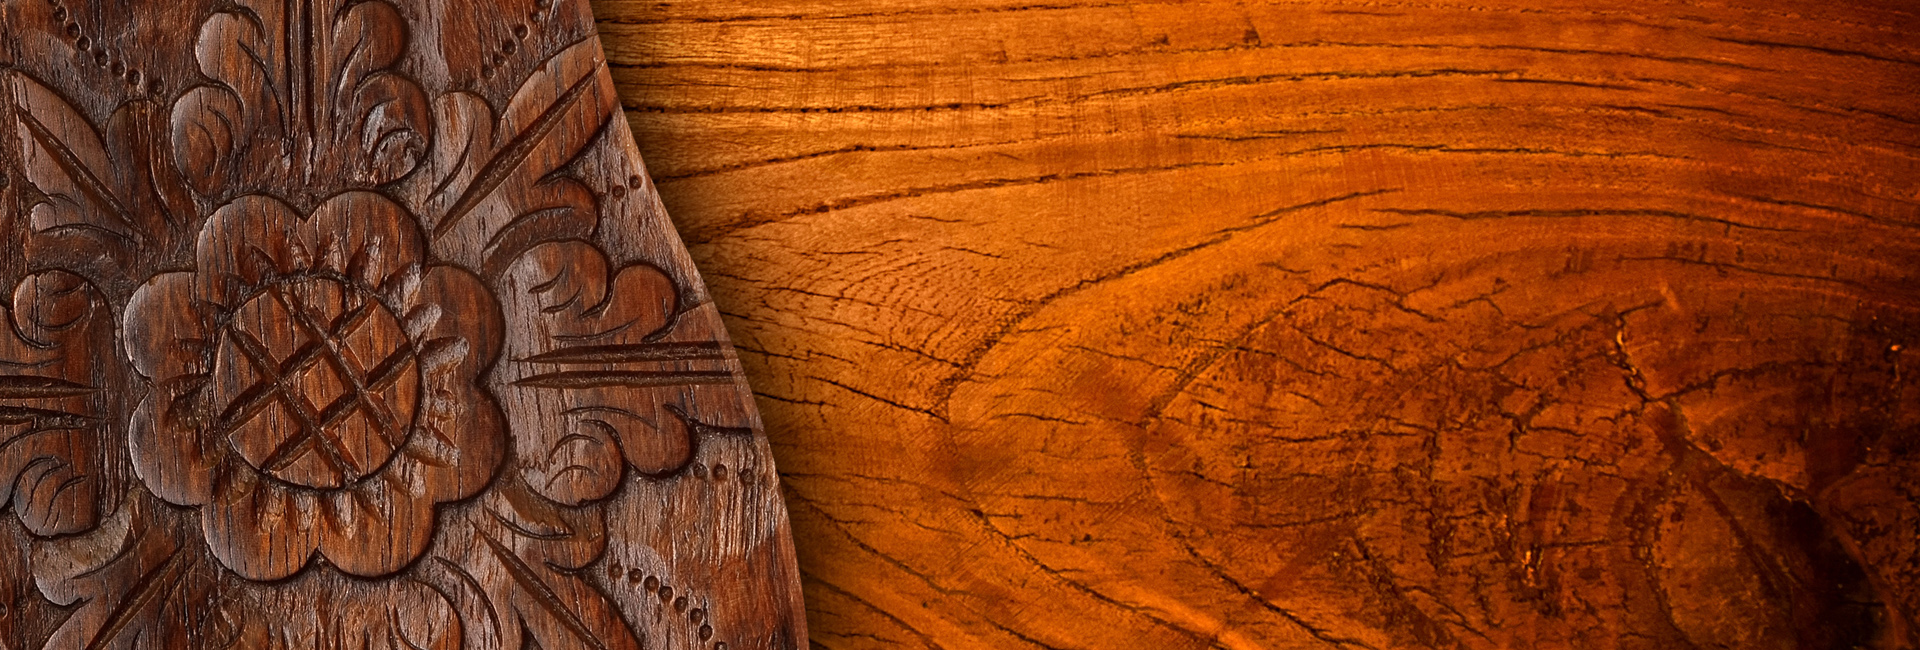 Wood Carving Background